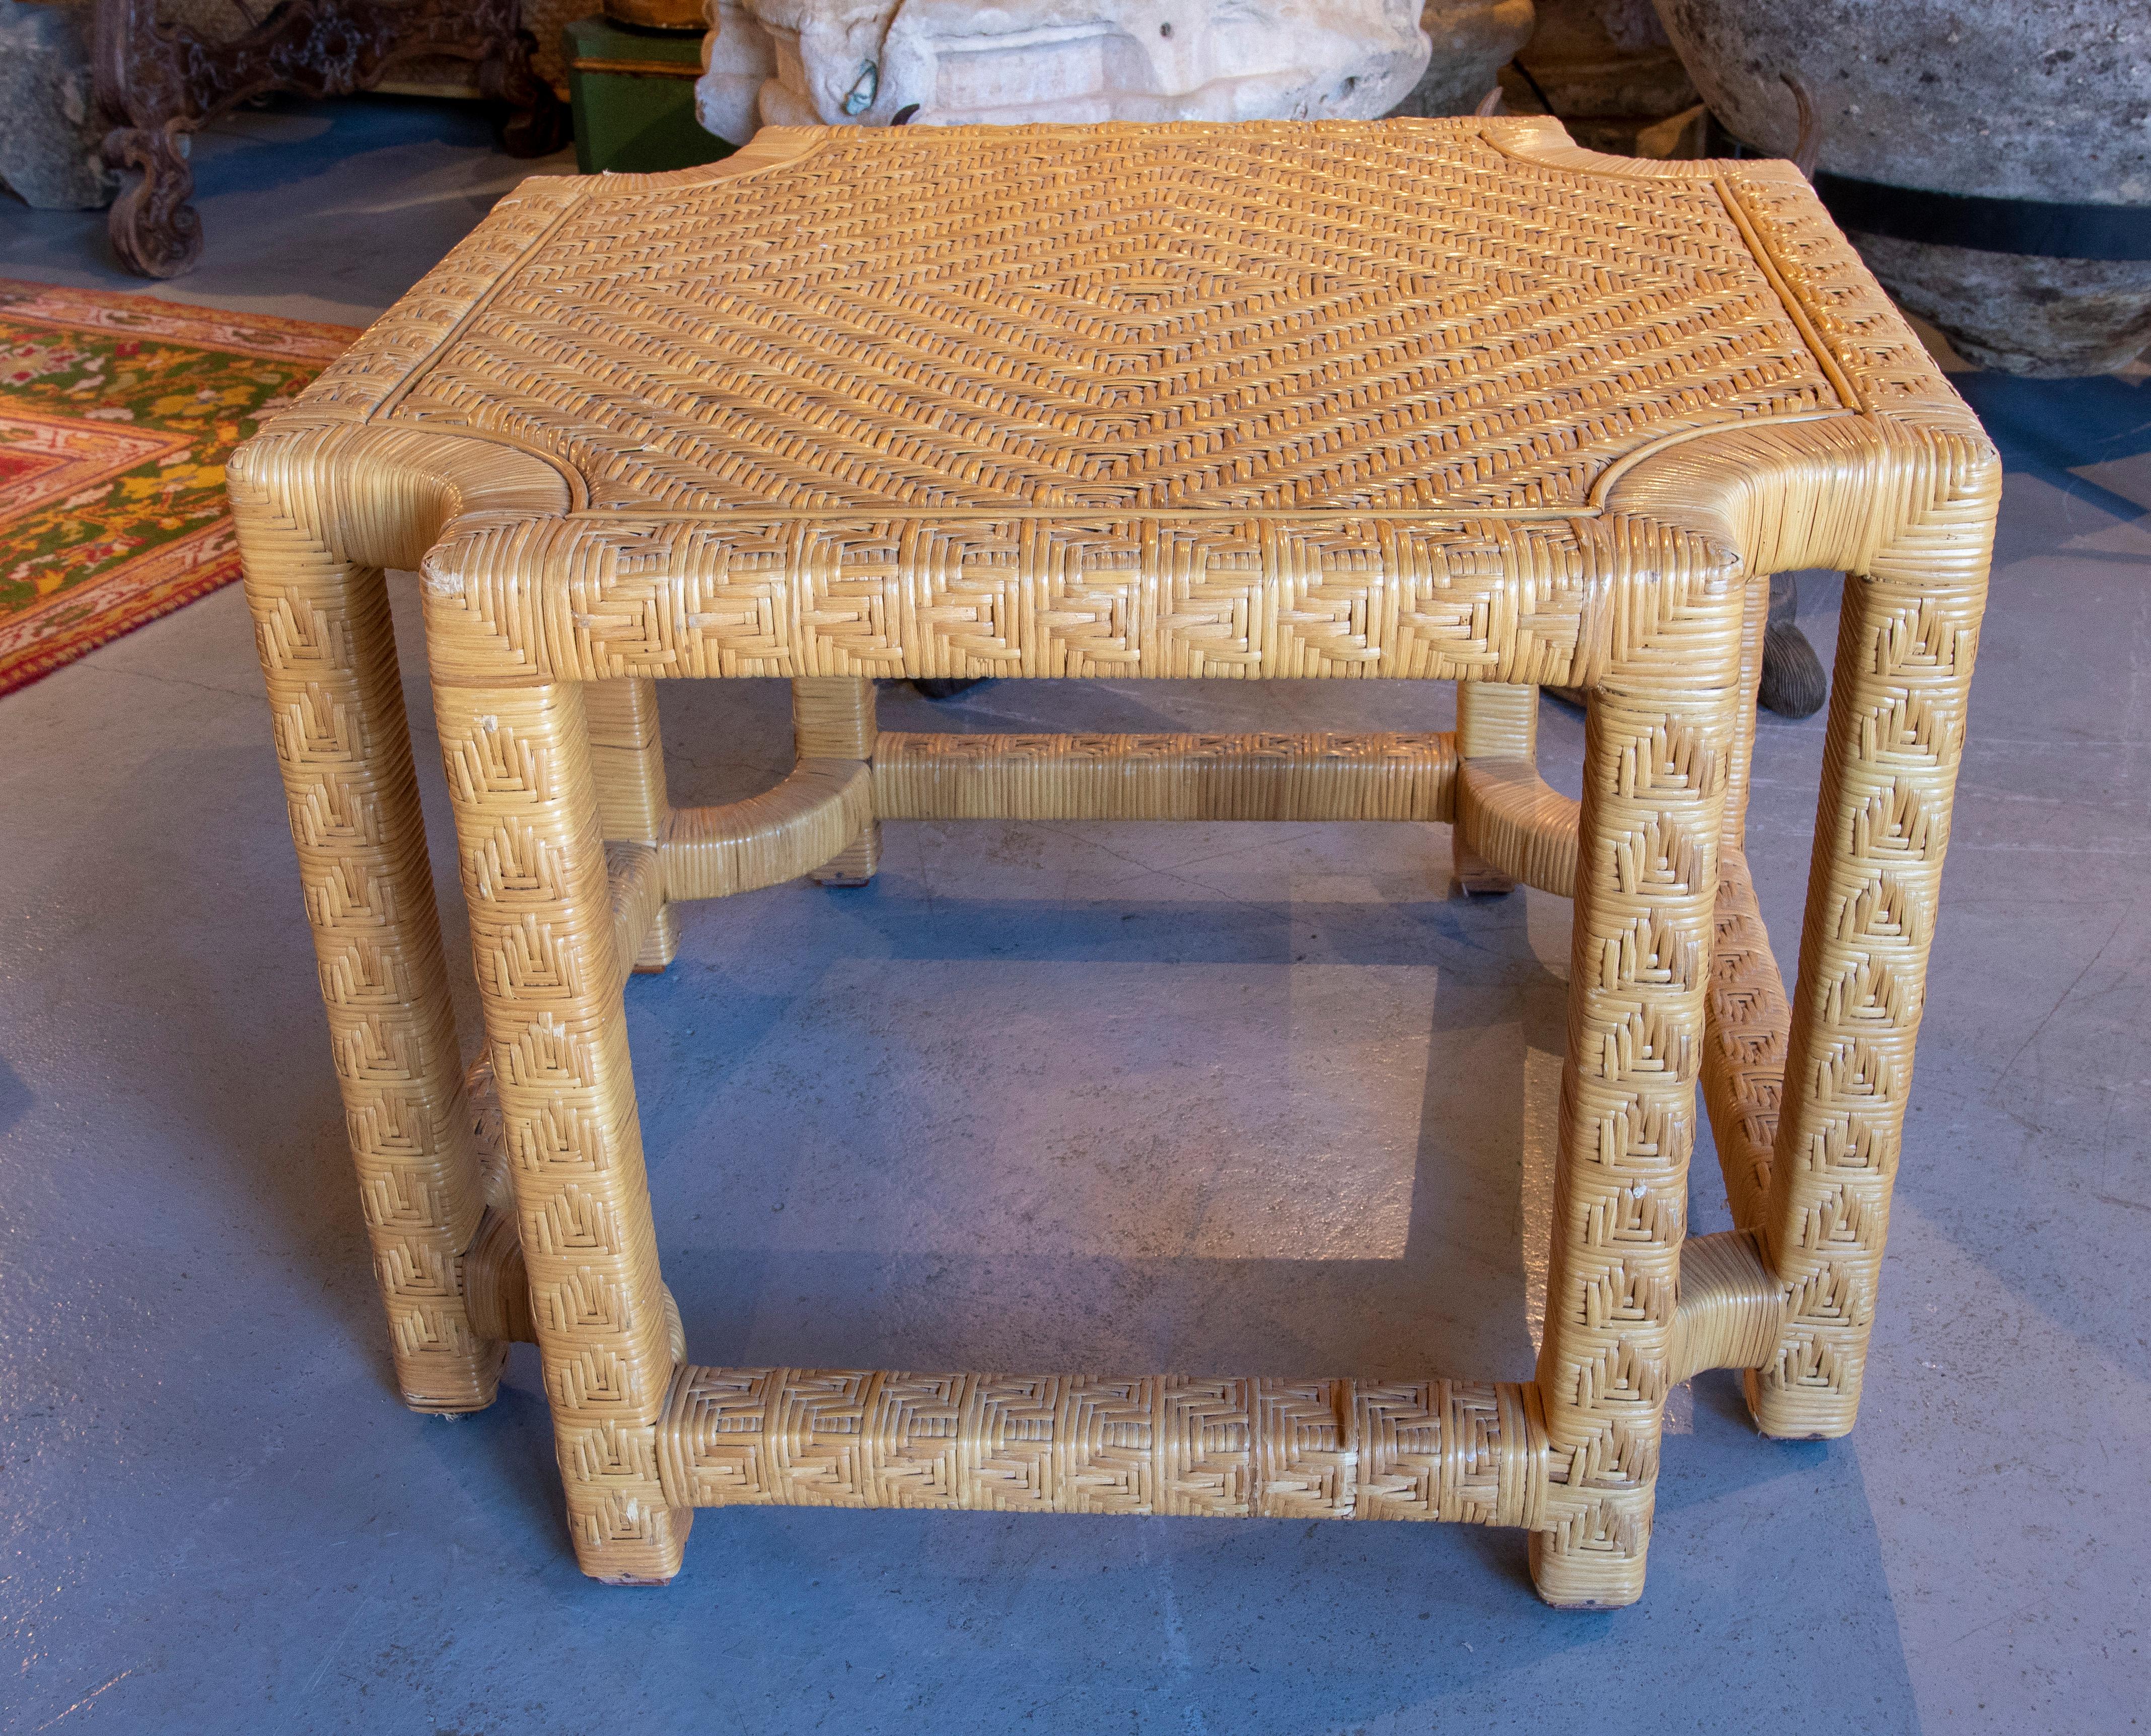 Spanish side table with wooden frame covered with Hand-Sewn Wicker.